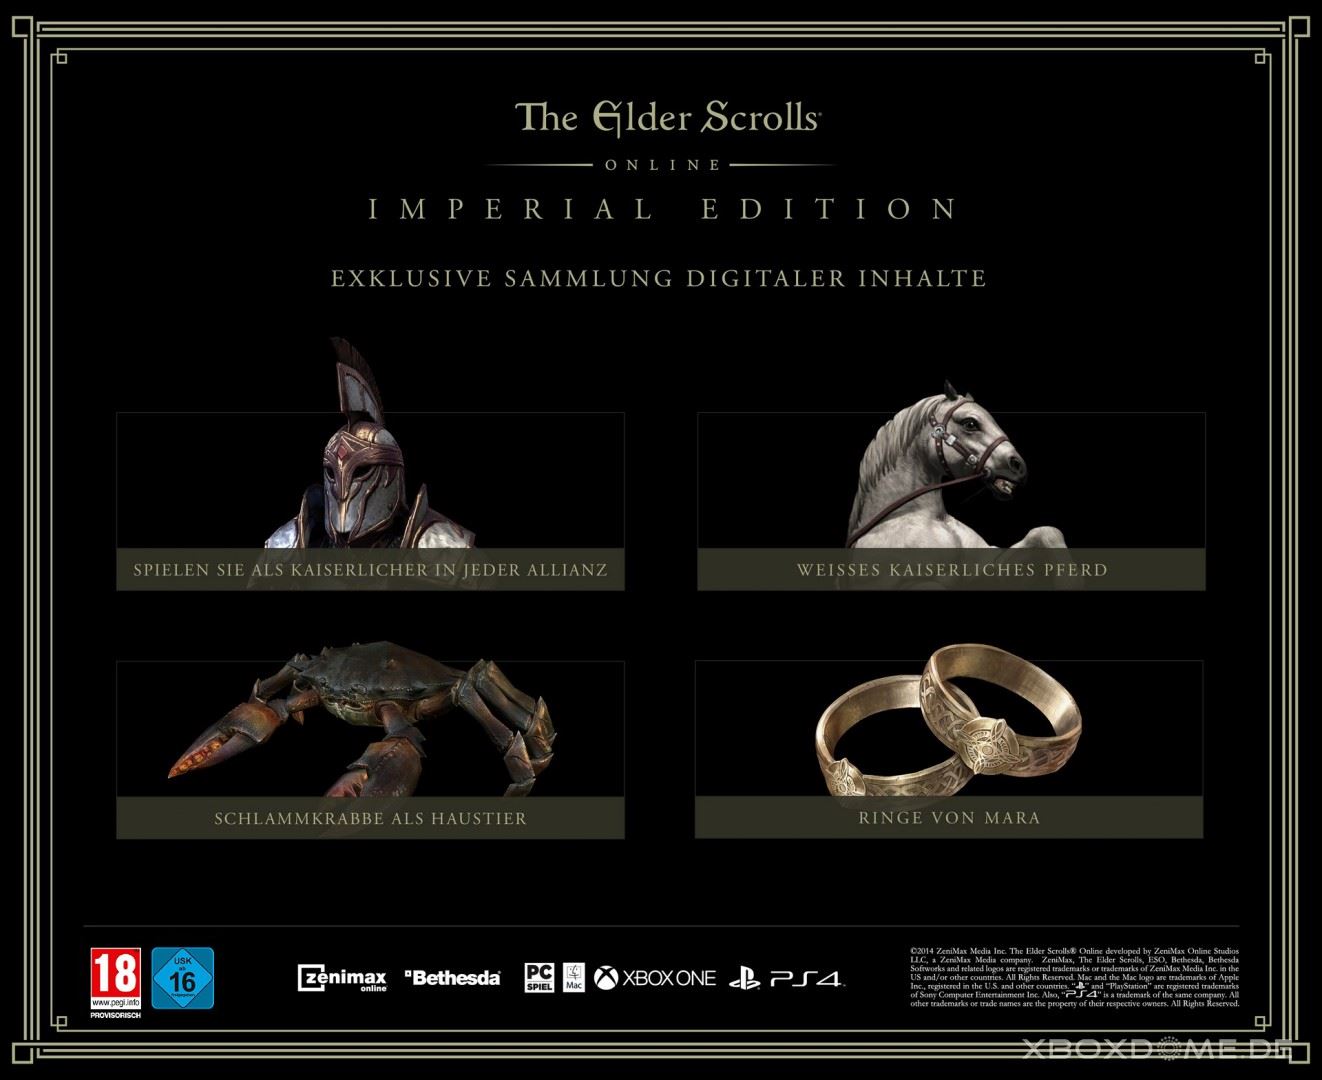 The elder scrolls online: Imperial Edition includes